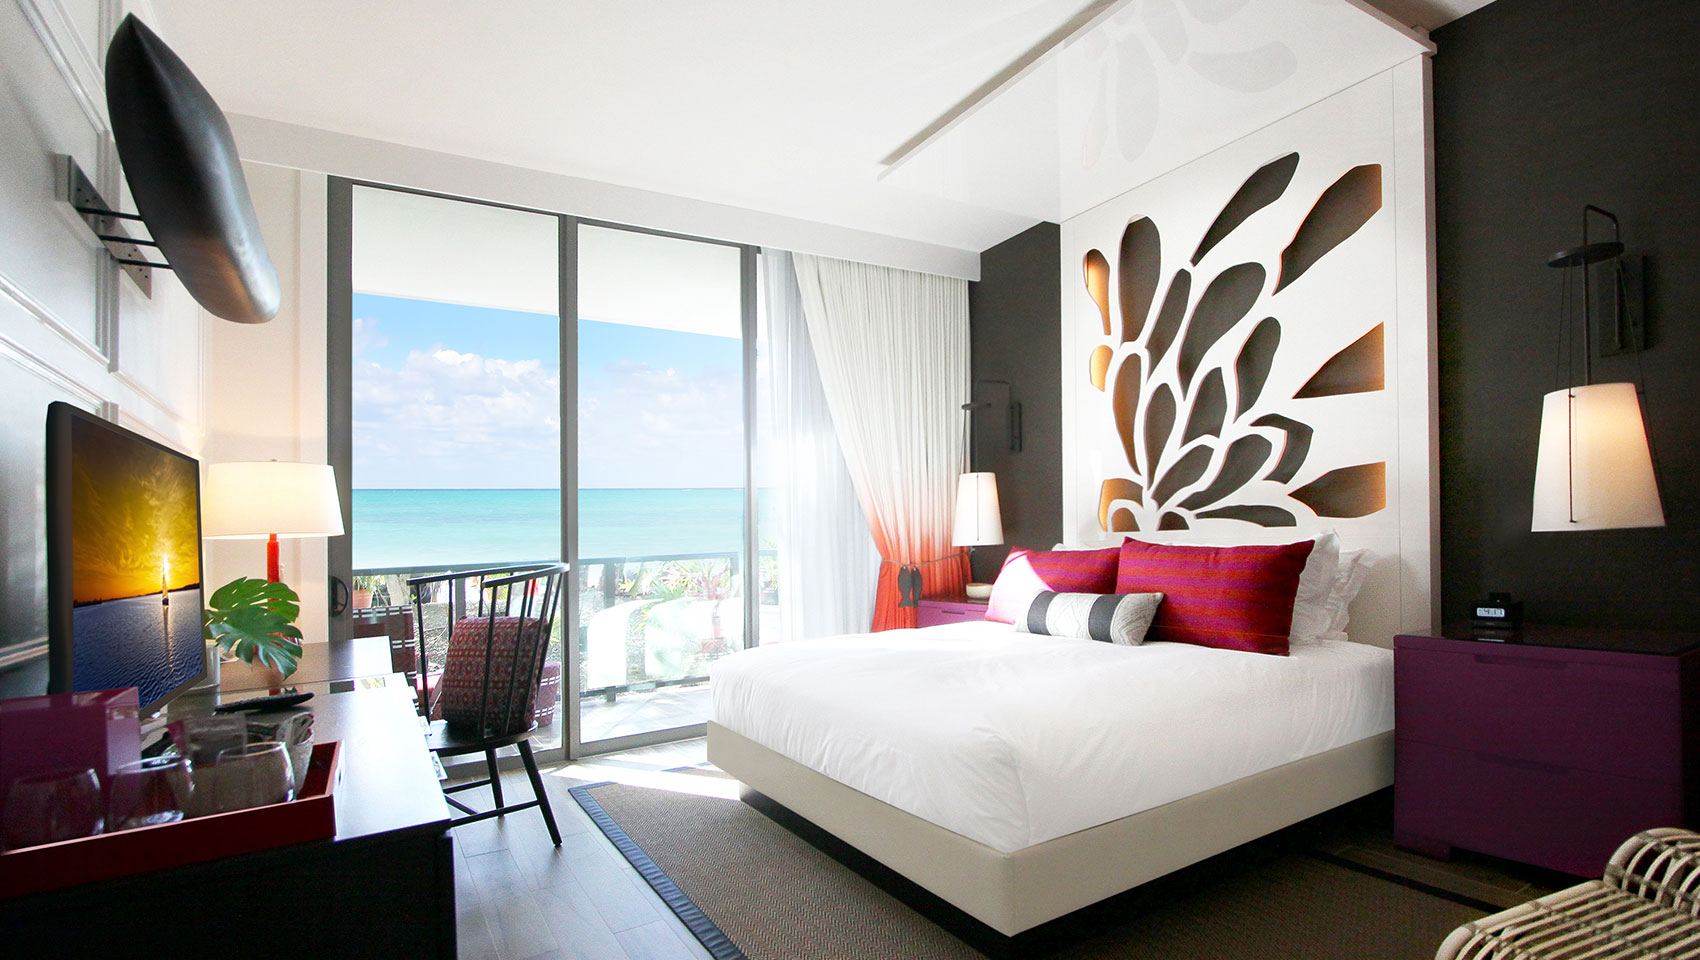 seafire resort and spa guest room